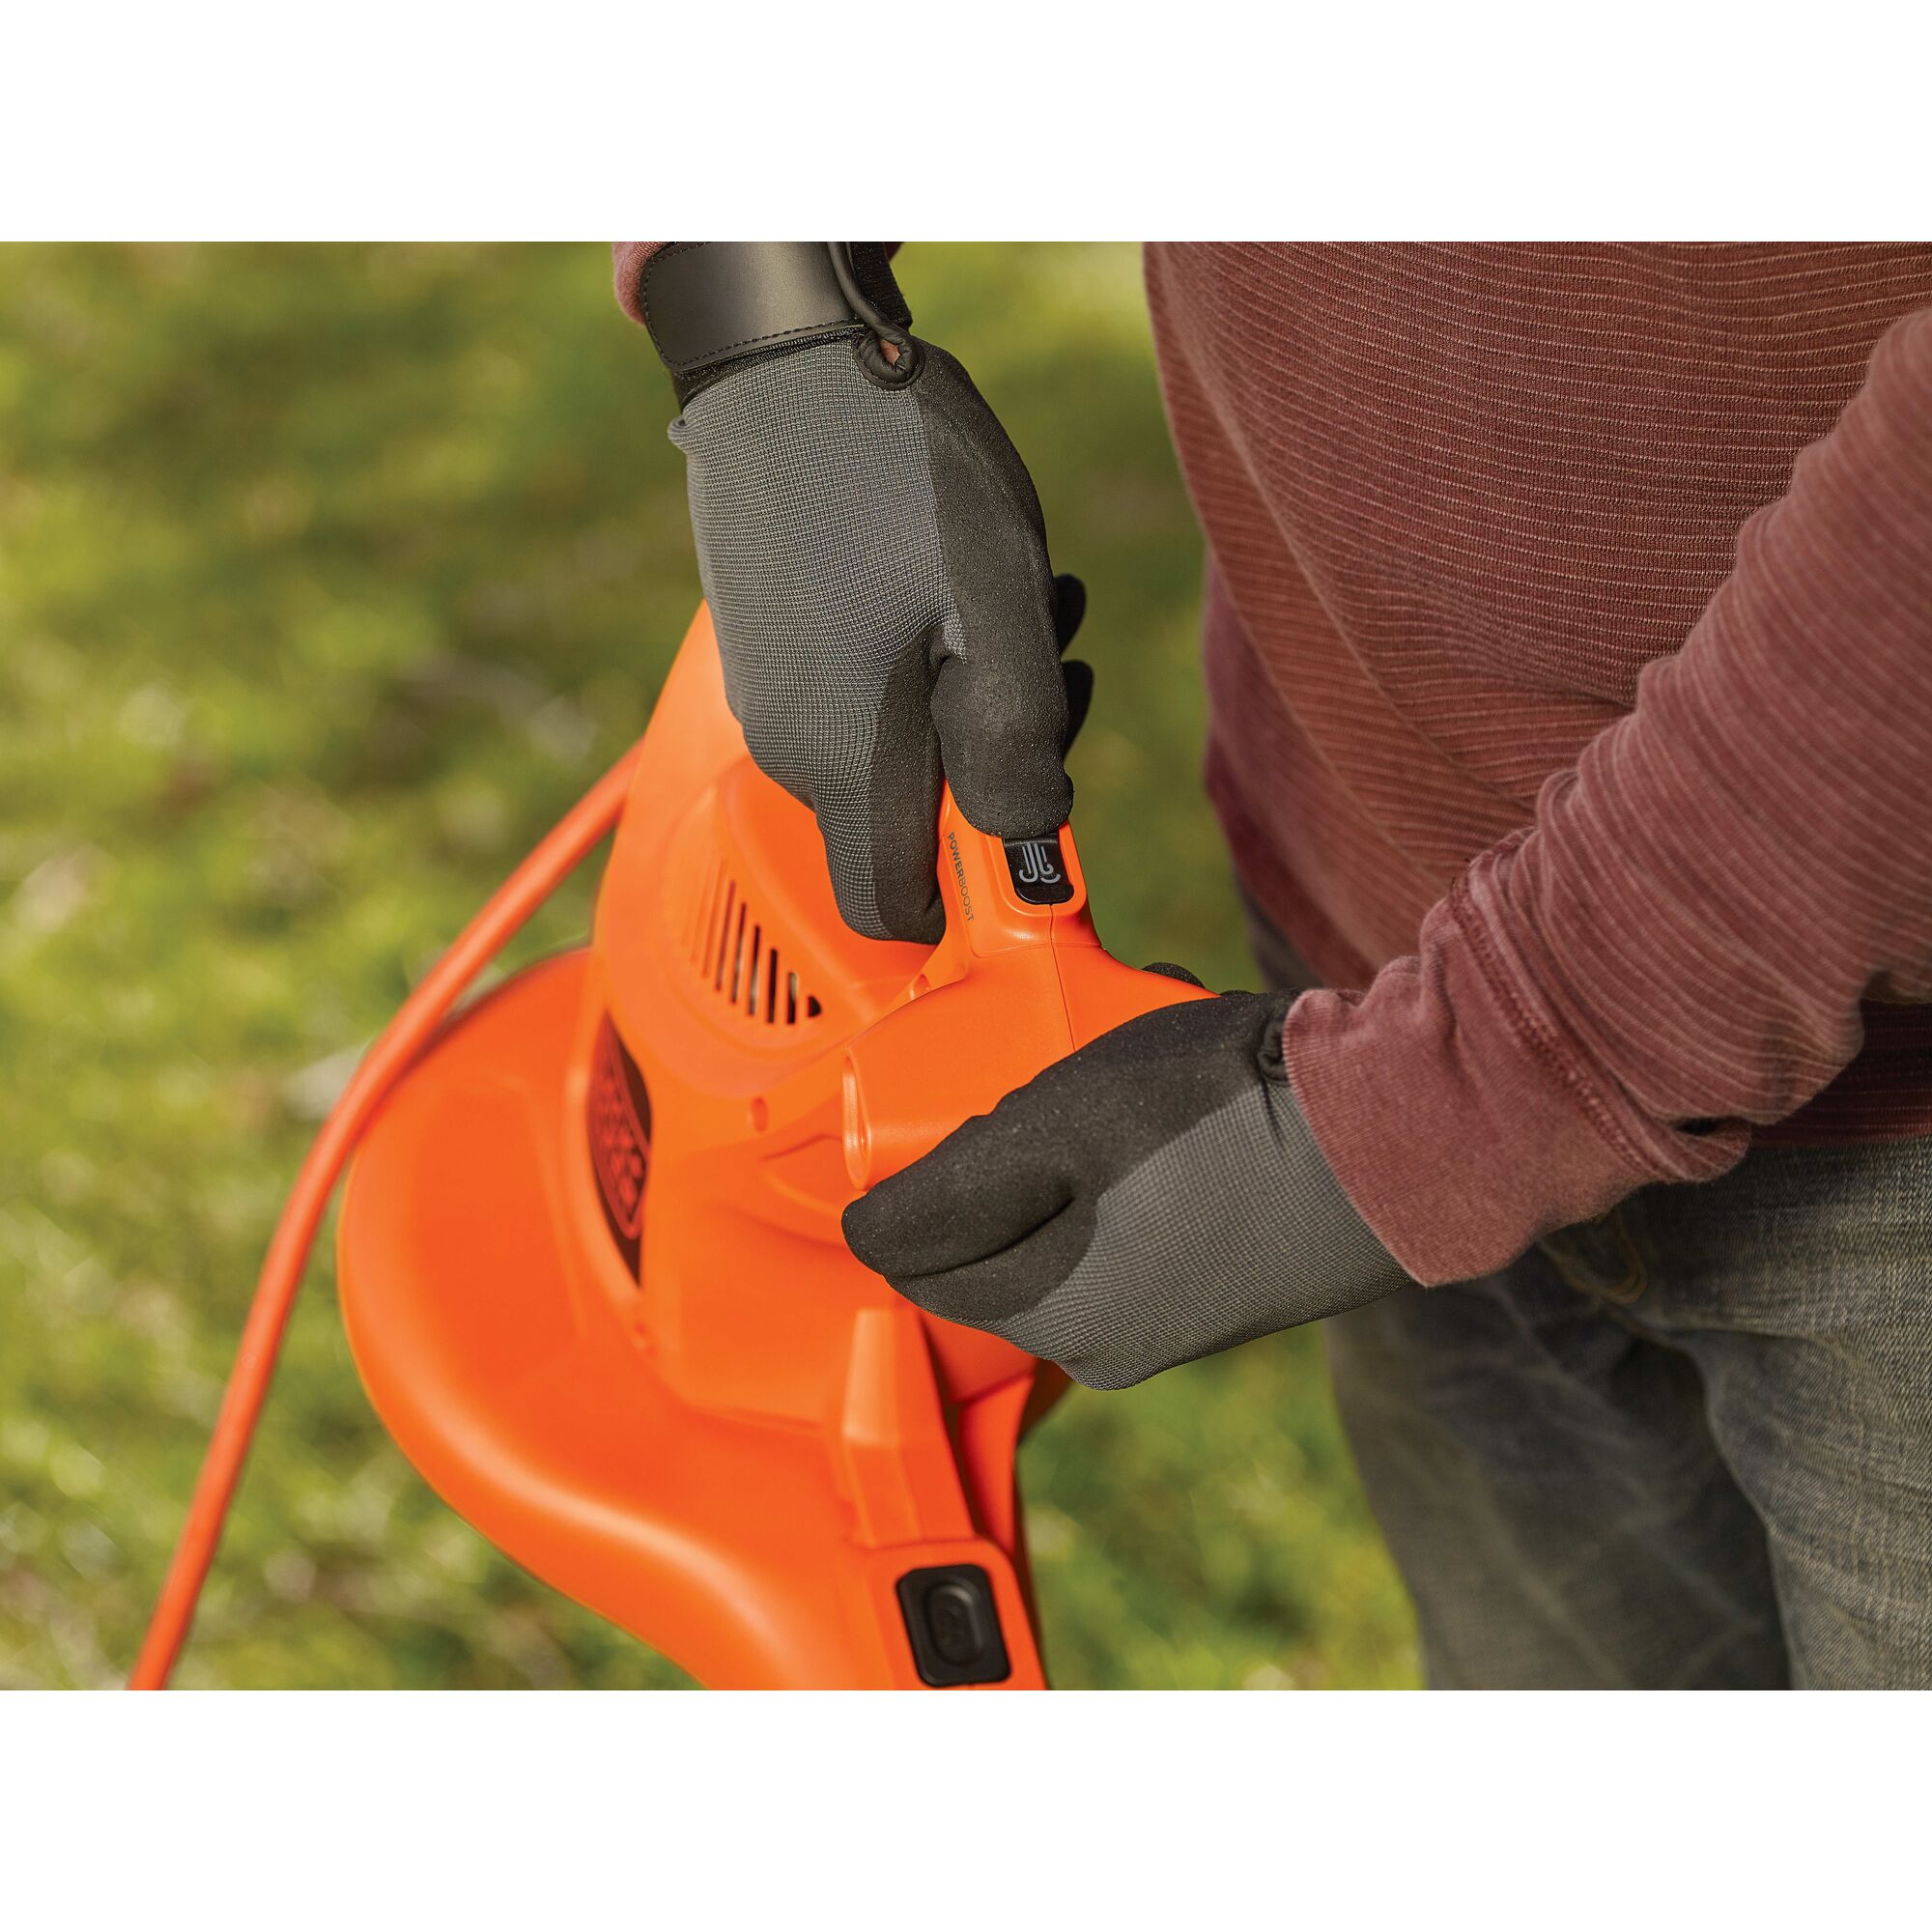 POWERBOOST button feature of 3 in 1 VACPACK 12 Ampere leaf blower, vacuum, and mulcher.